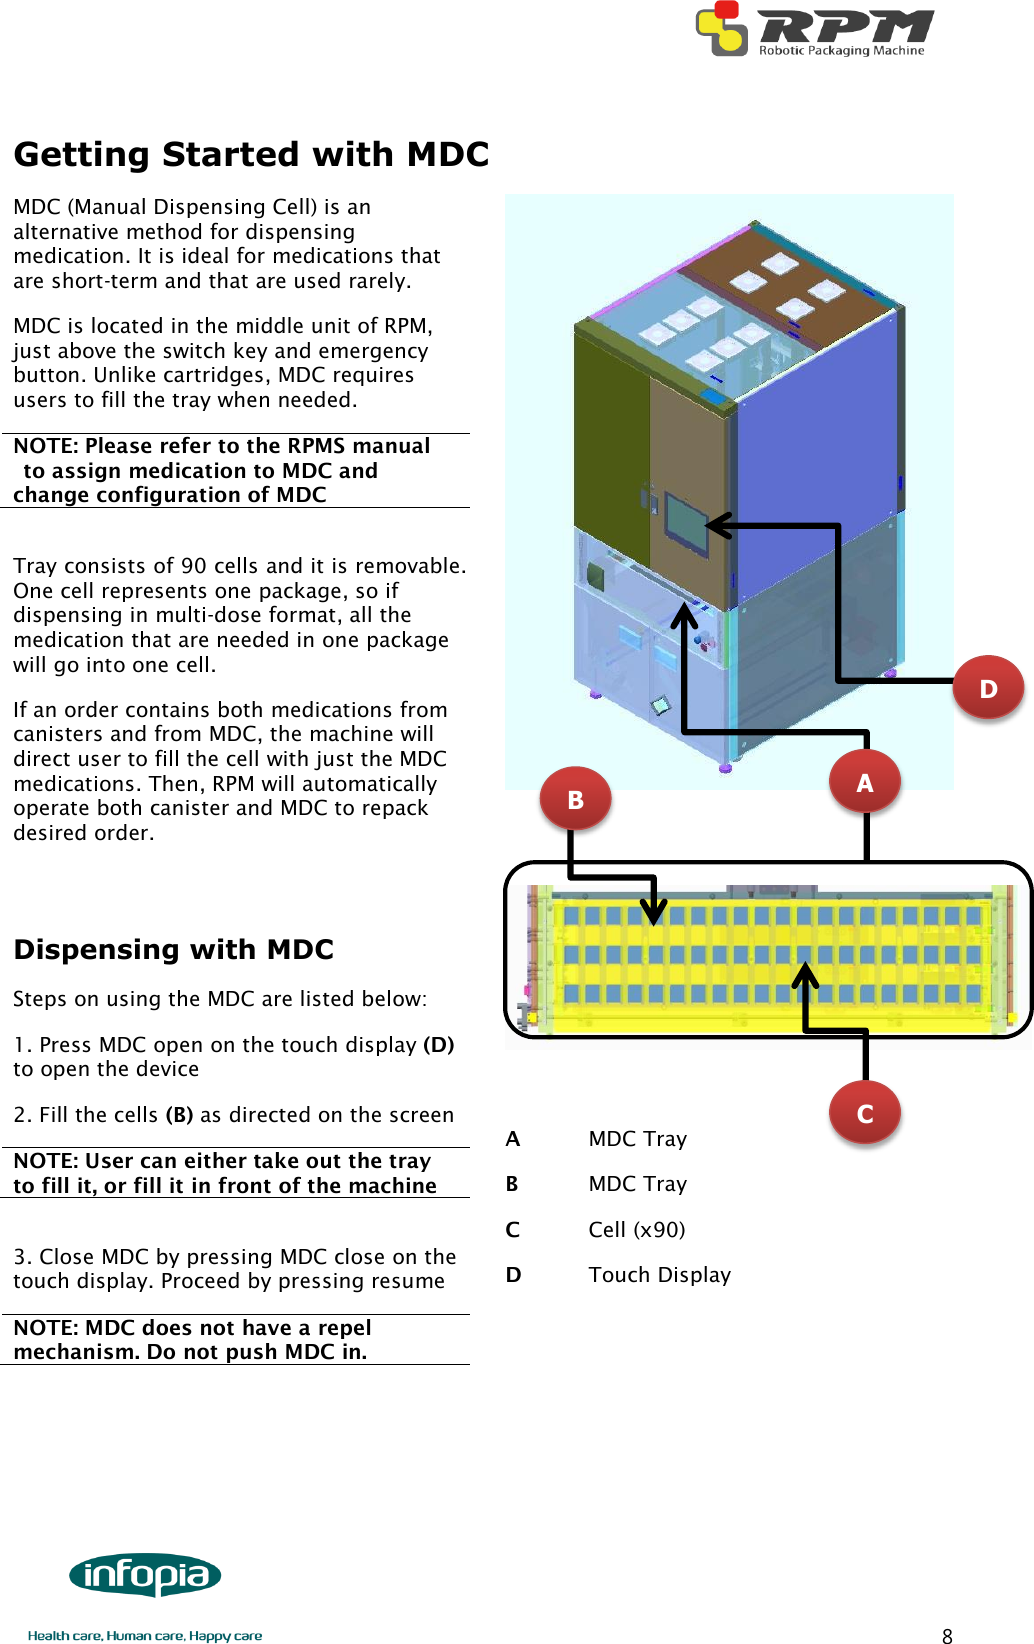        8 Getting Started with MDC MDC (Manual Dispensing Cell) is an alternative method for dispensing medication. It is ideal for medications that are short-term and that are used rarely.   MDC is located in the middle unit of RPM, just above the switch key and emergency button. Unlike cartridges, MDC requires users to fill the tray when needed. NOTE: Please refer to the RPMS manual   to assign medication to MDC and change configuration of MDC  Tray consists of 90 cells and it is removable. One cell represents one package, so if dispensing in multi-dose format, all the medication that are needed in one package will go into one cell. If an order contains both medications from canisters and from MDC, the machine will direct user to fill the cell with just the MDC medications. Then, RPM will automatically operate both canister and MDC to repack desired order.  Dispensing with MDC Steps on using the MDC are listed below: 1. Press MDC open on the touch display (D) to open the device 2. Fill the cells (B) as directed on the screen NOTE: User can either take out the tray to fill it, or fill it in front of the machine  3. Close MDC by pressing MDC close on the touch display. Proceed by pressing resume NOTE: MDC does not have a repel mechanism. Do not push MDC in.       A    MDC Tray B    MDC Tray C  Cell (x90) D  Touch Display   C B D A 